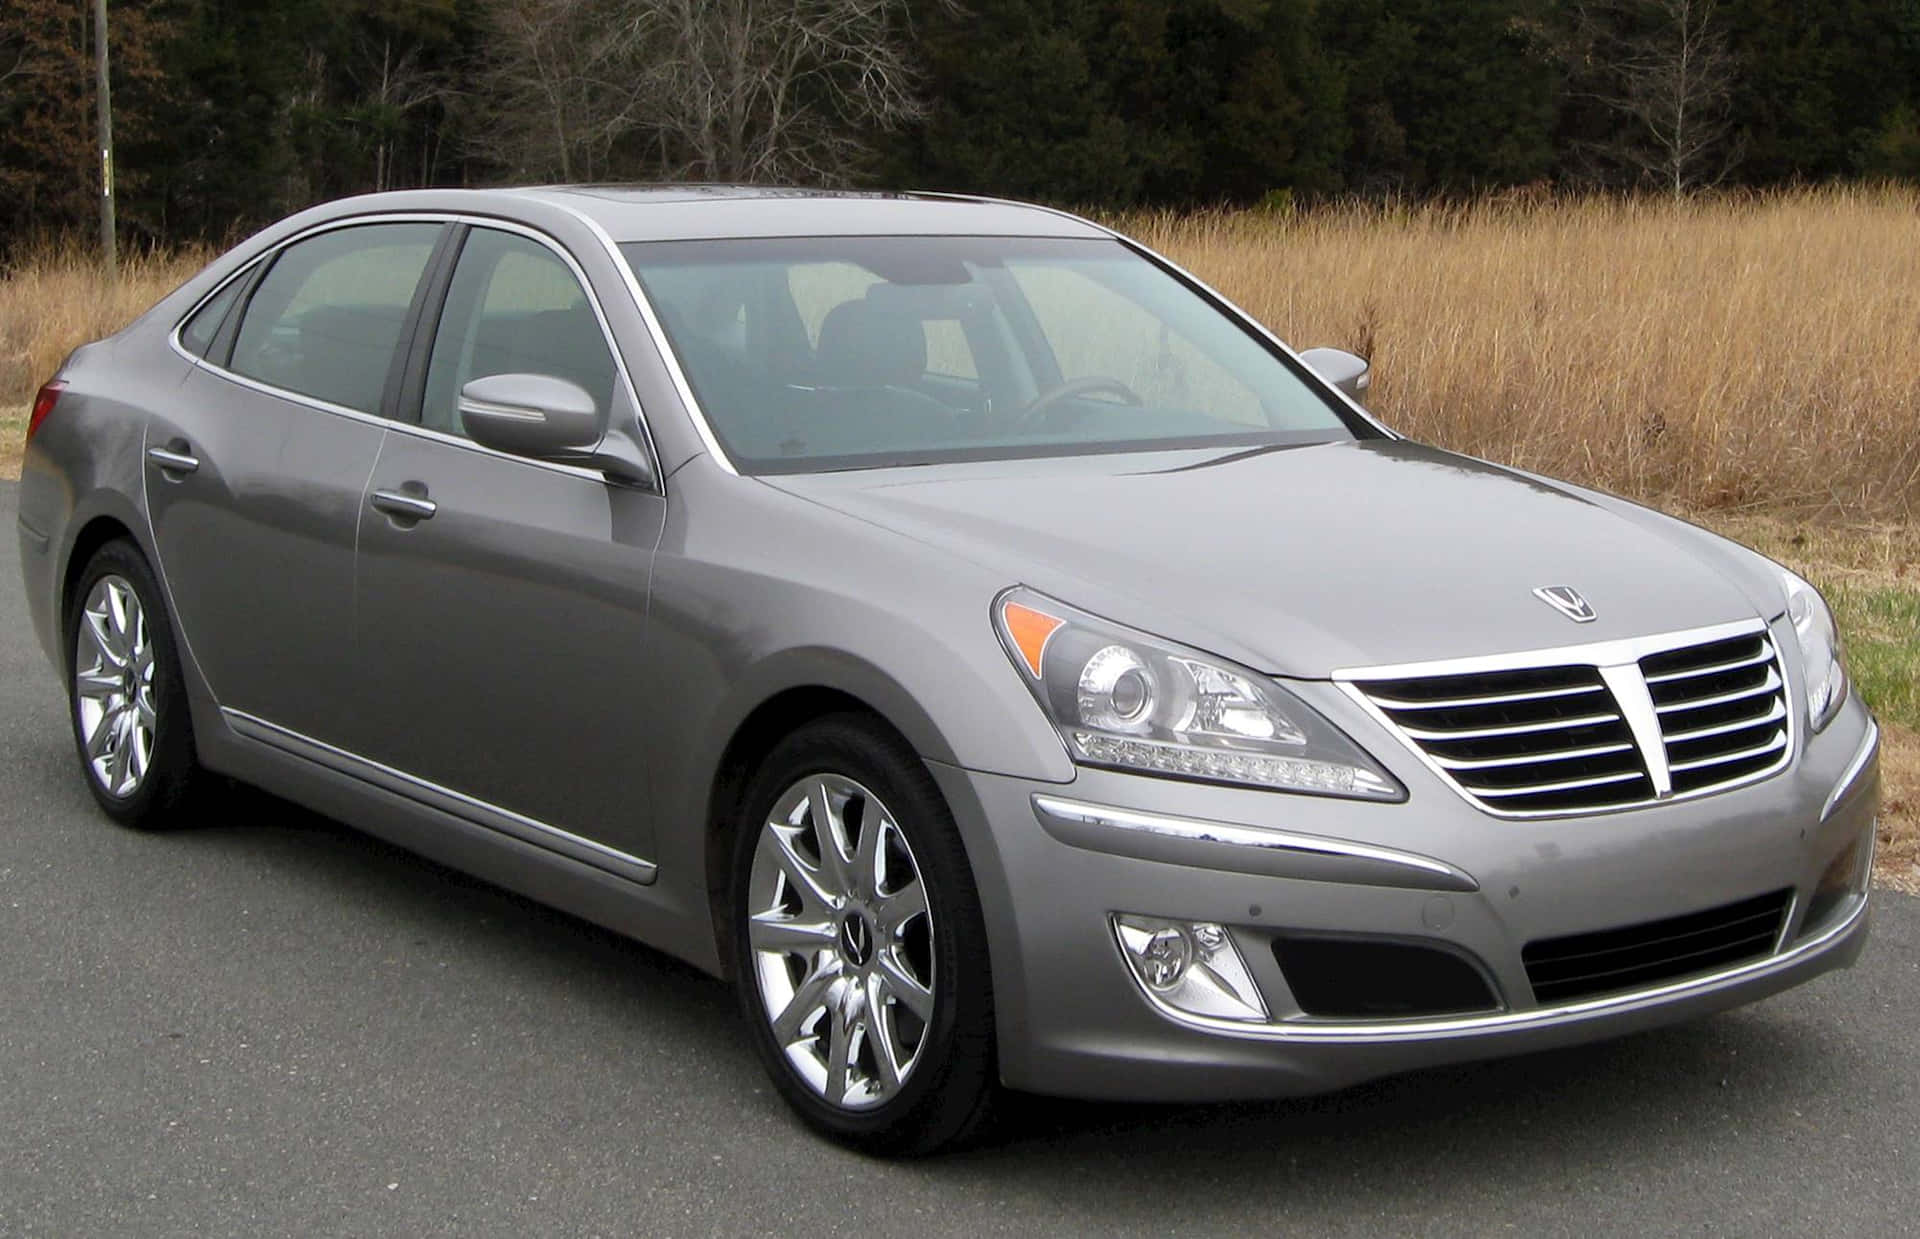 Luxurious Hyundai Equus in Sophisticated Style Wallpaper